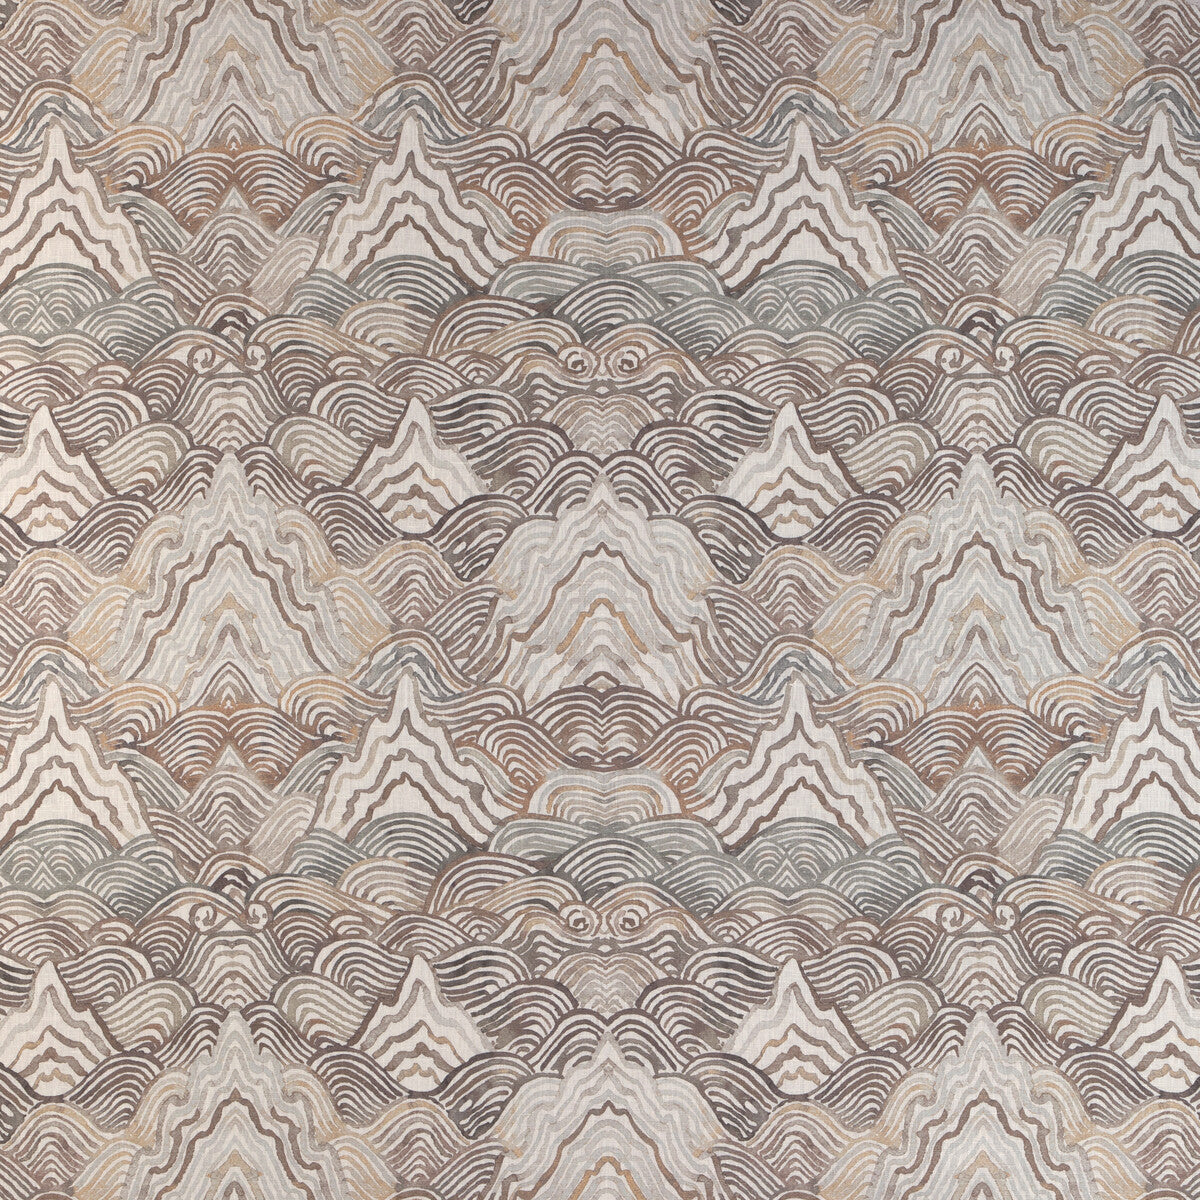 Shangri La fabric in stone color - pattern SHANGRI LA.611.0 - by Kravet Couture in the Casa Botanica collection